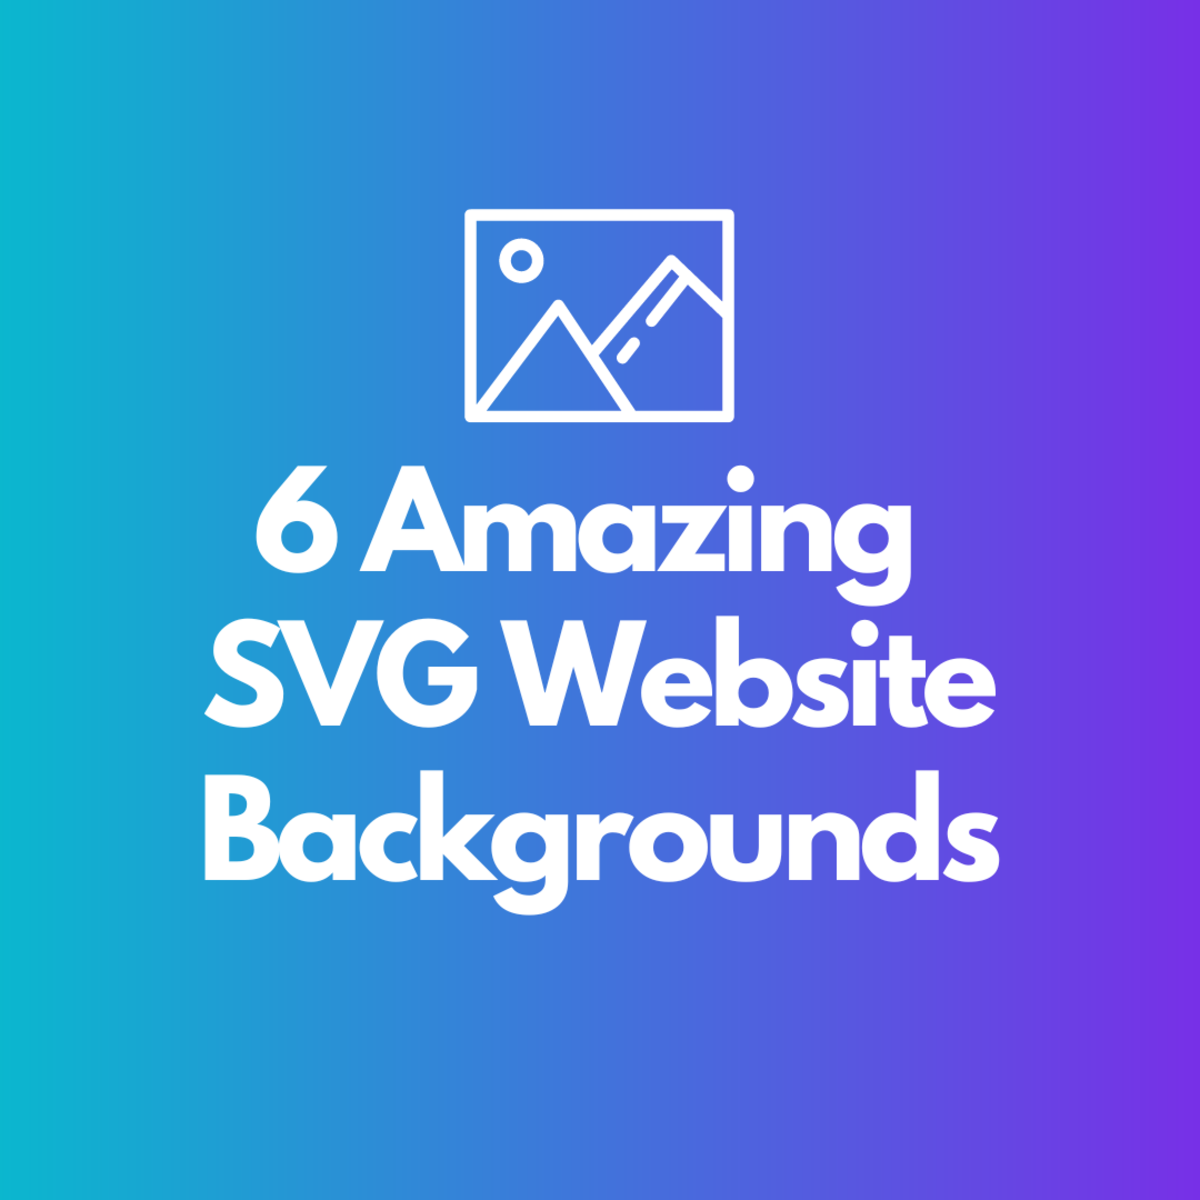 Discover some super cool SVG website backgrounds in this ultimate list!